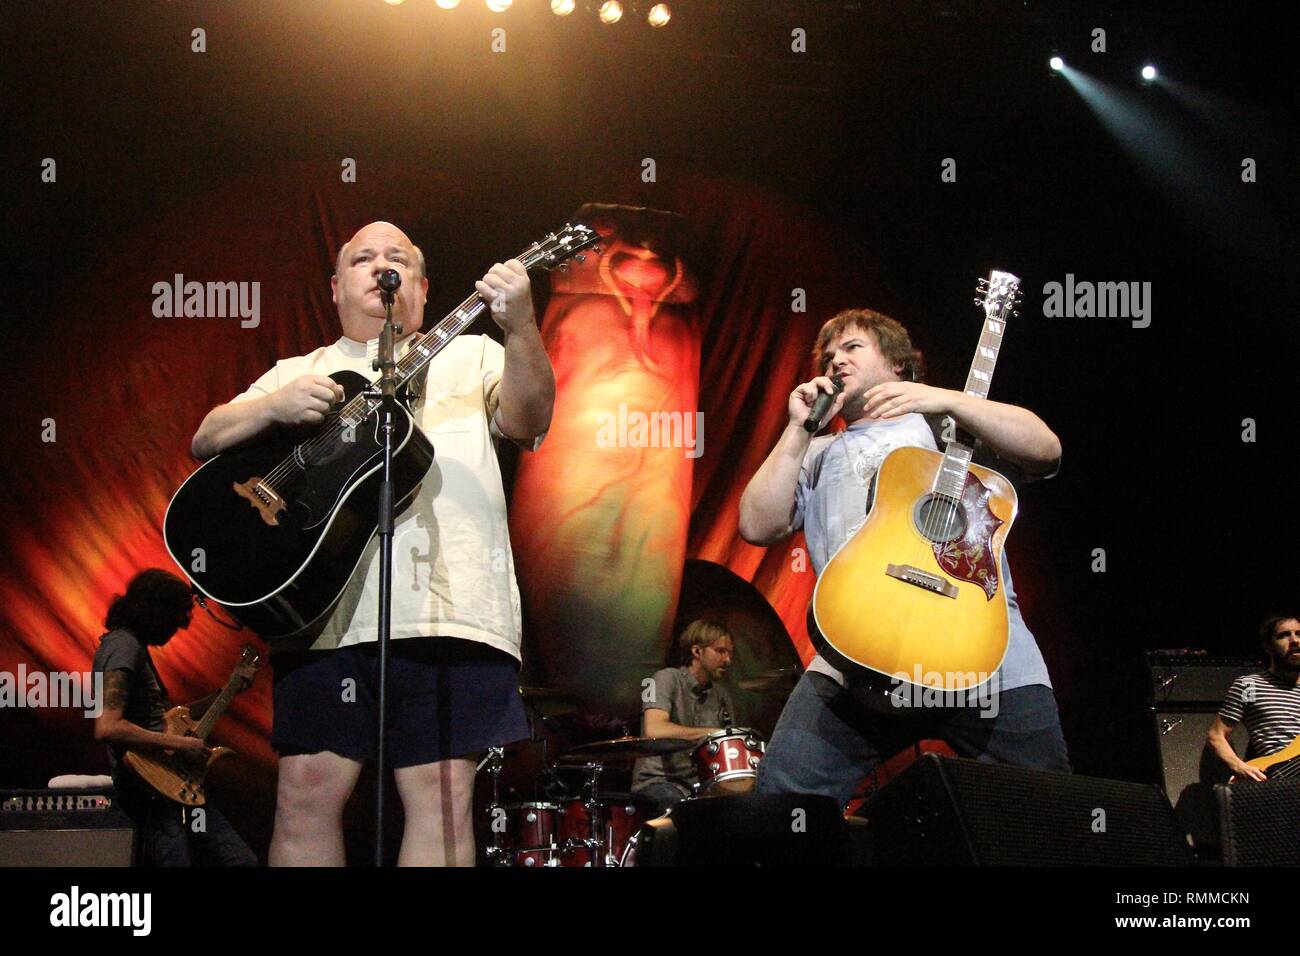 Musicians Kyle Gas and Jack Black are shown performing on stage during a 'live' concert appearance with Tenacious D. Stock Photo